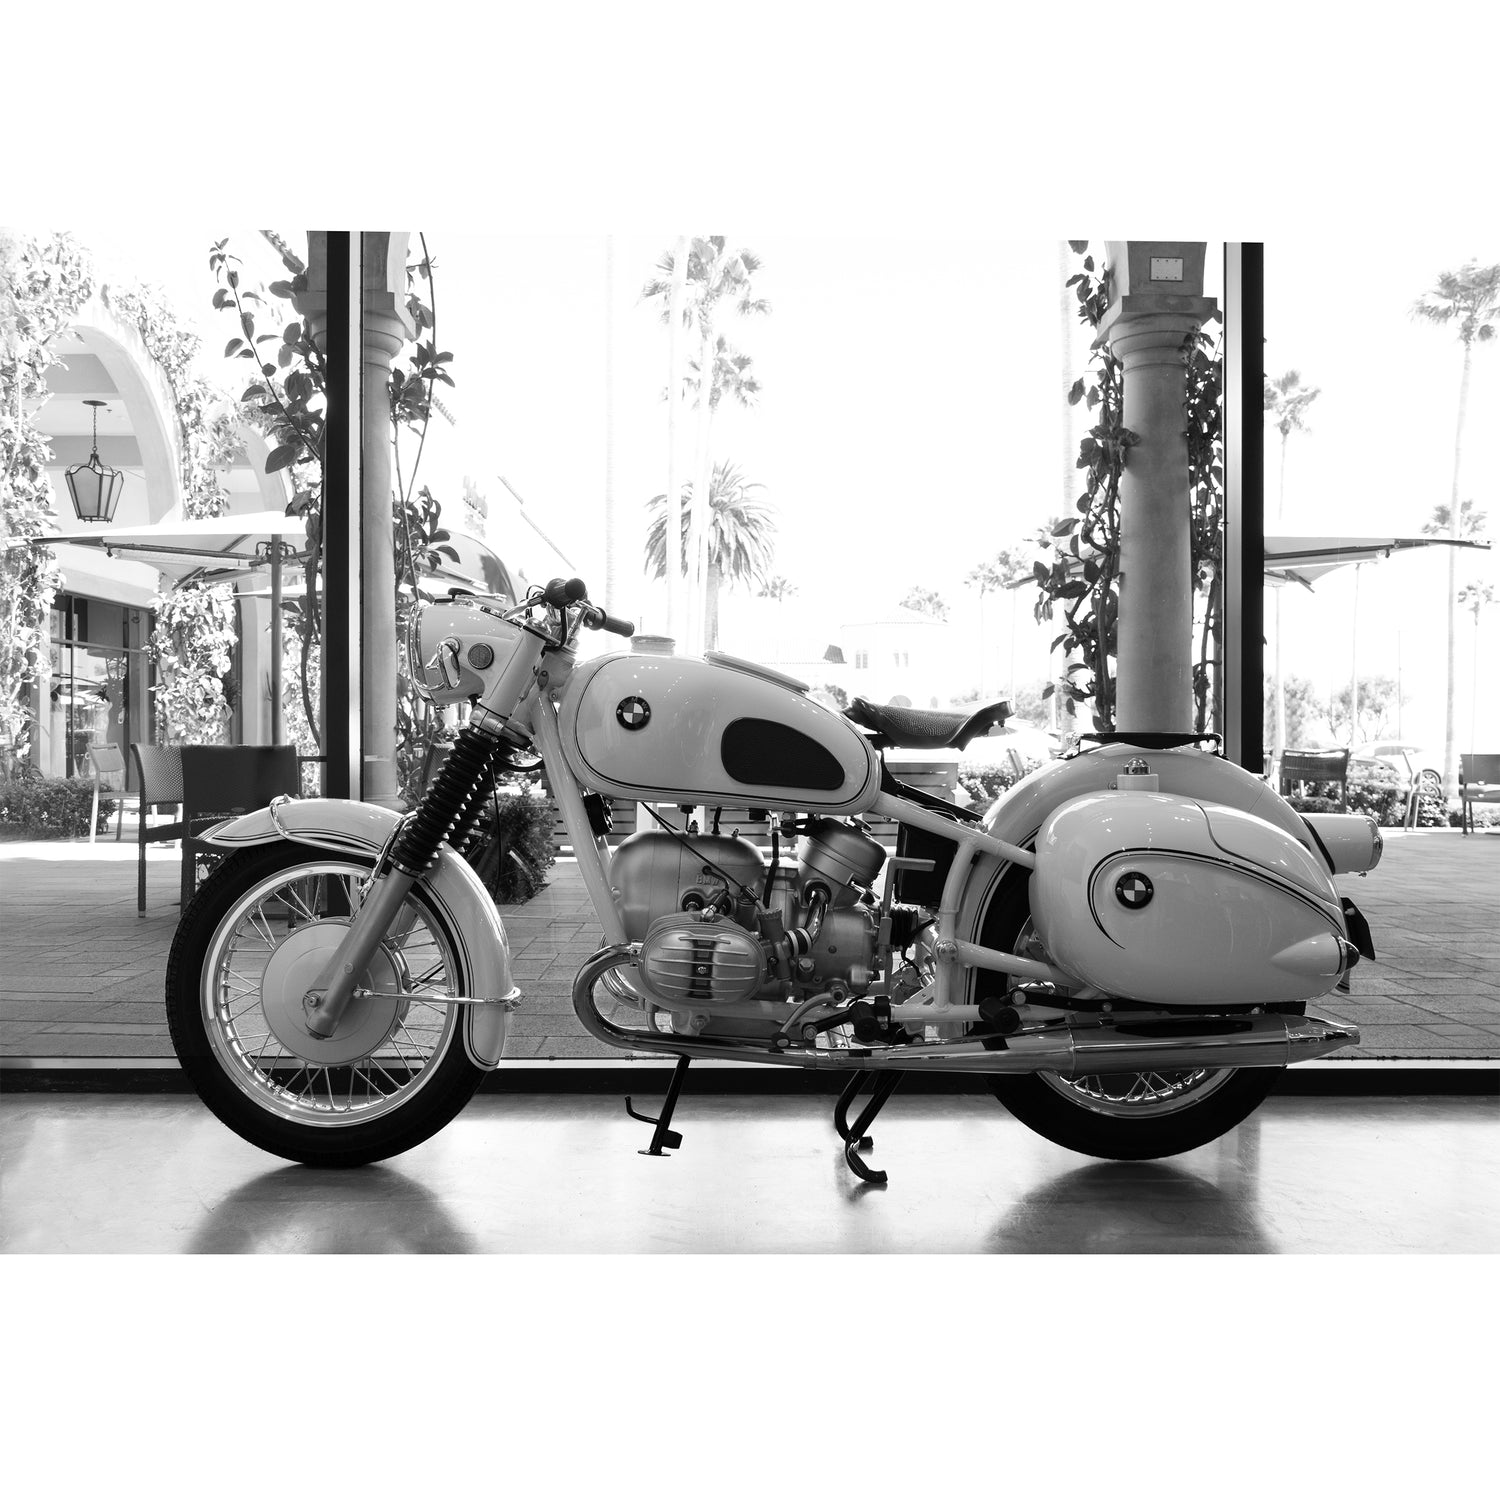 1969 BMW Motorcycle